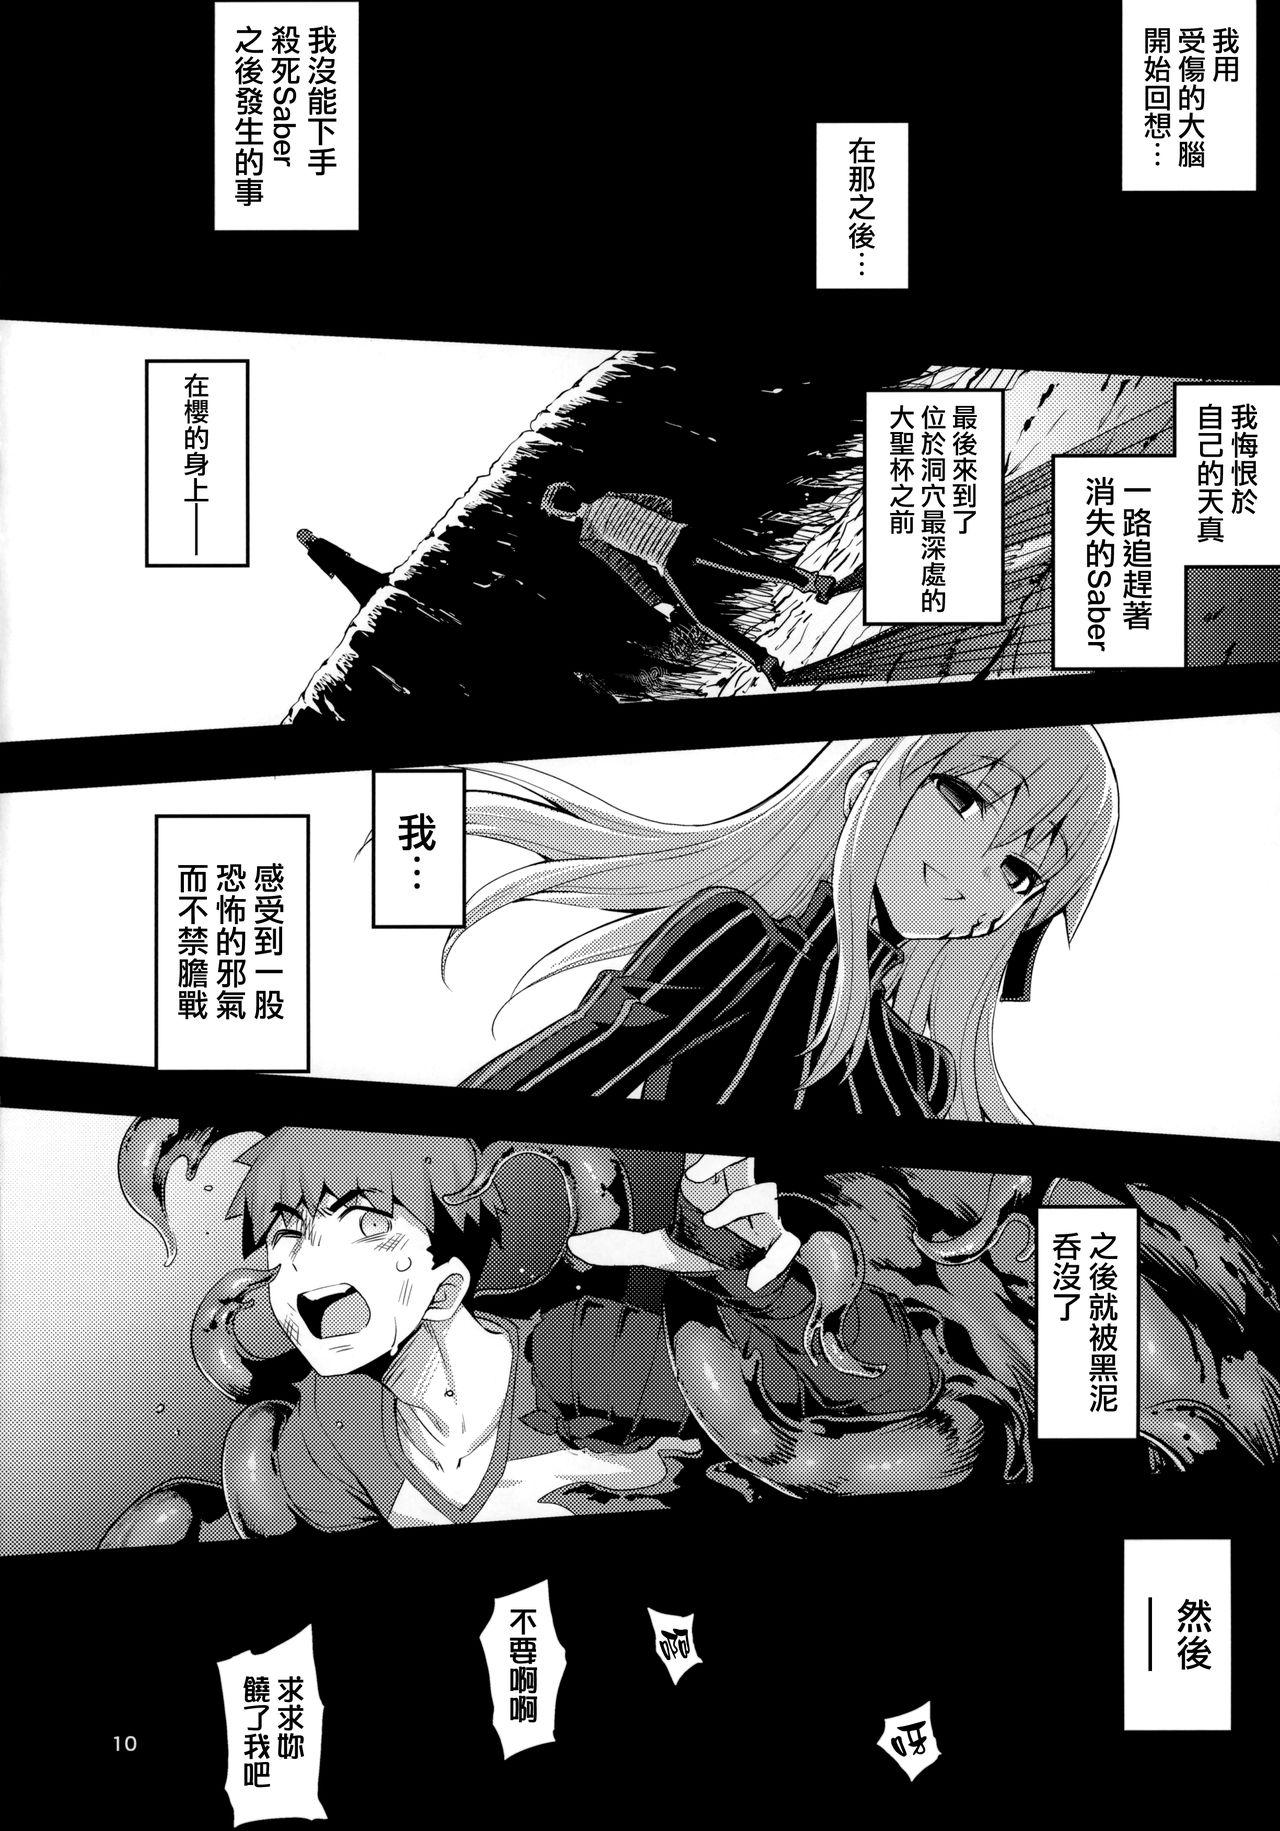 Fodendo RE30 - Fate stay night Shemales - Page 9